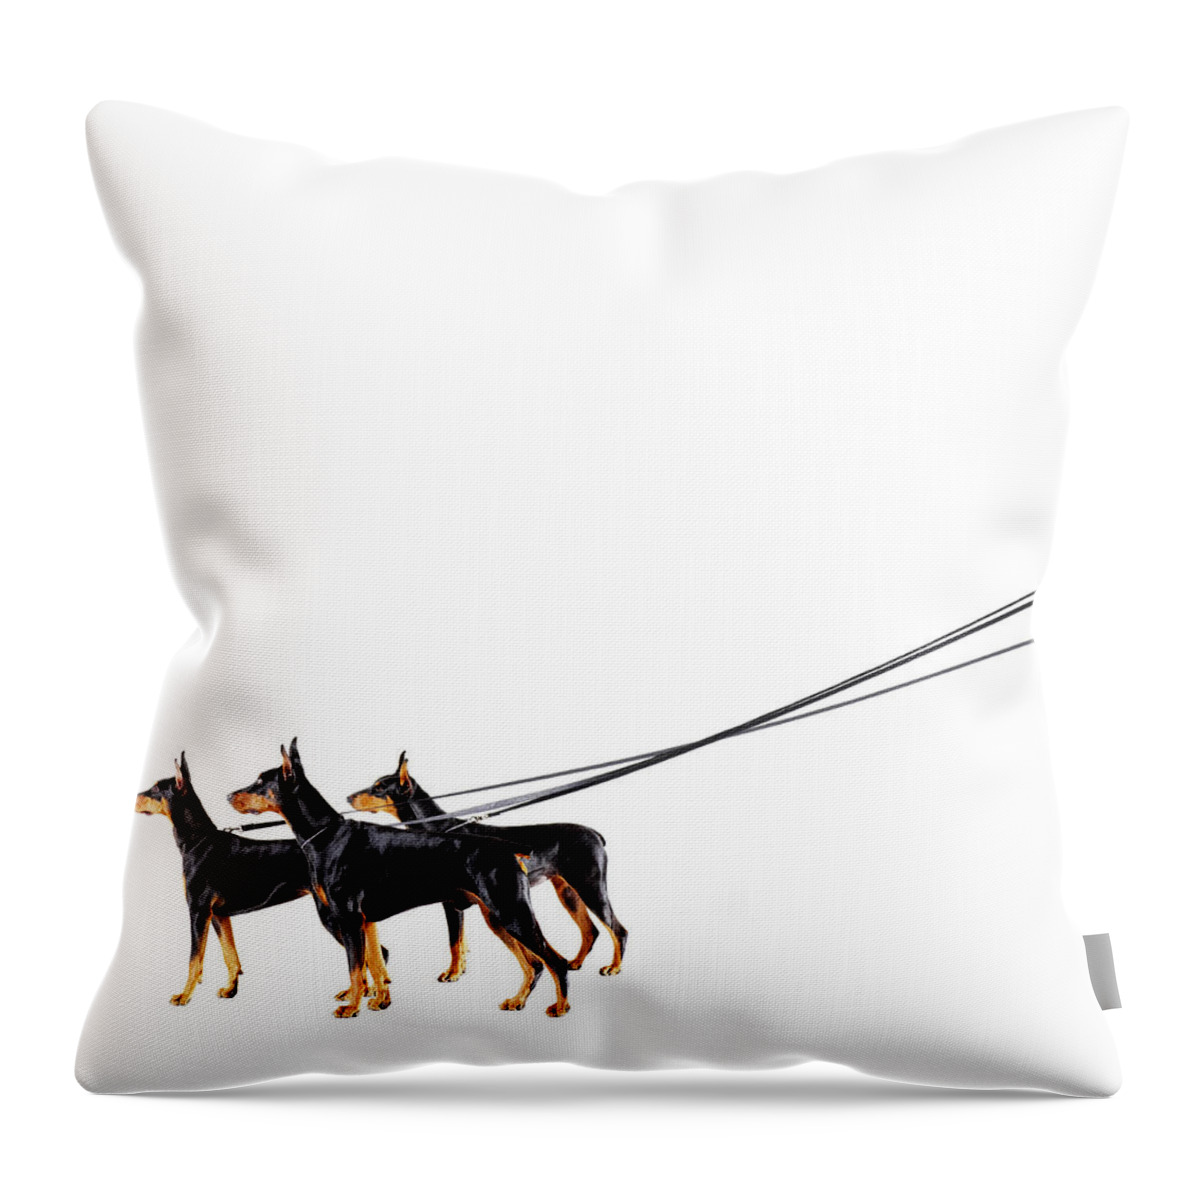 Pets Throw Pillow featuring the photograph Three Dobermans On Leash by Thomas Northcut